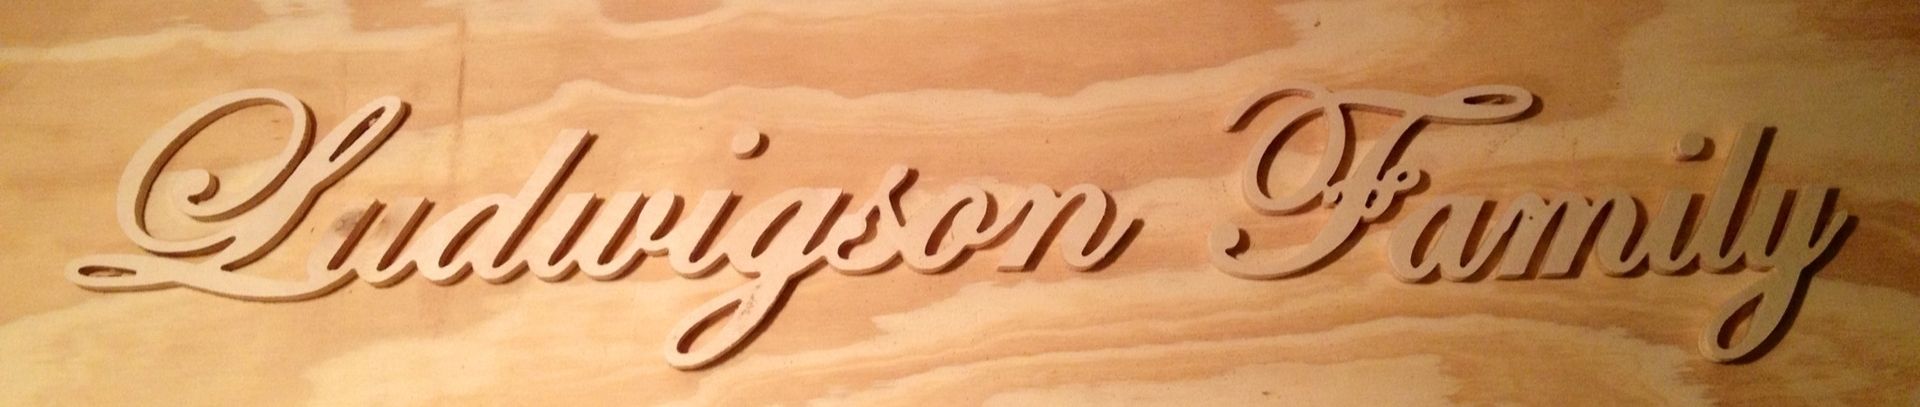 Custom Made Cursive Name Sign Black 24in X 6in By Valley Custom Woodworking CustomMade